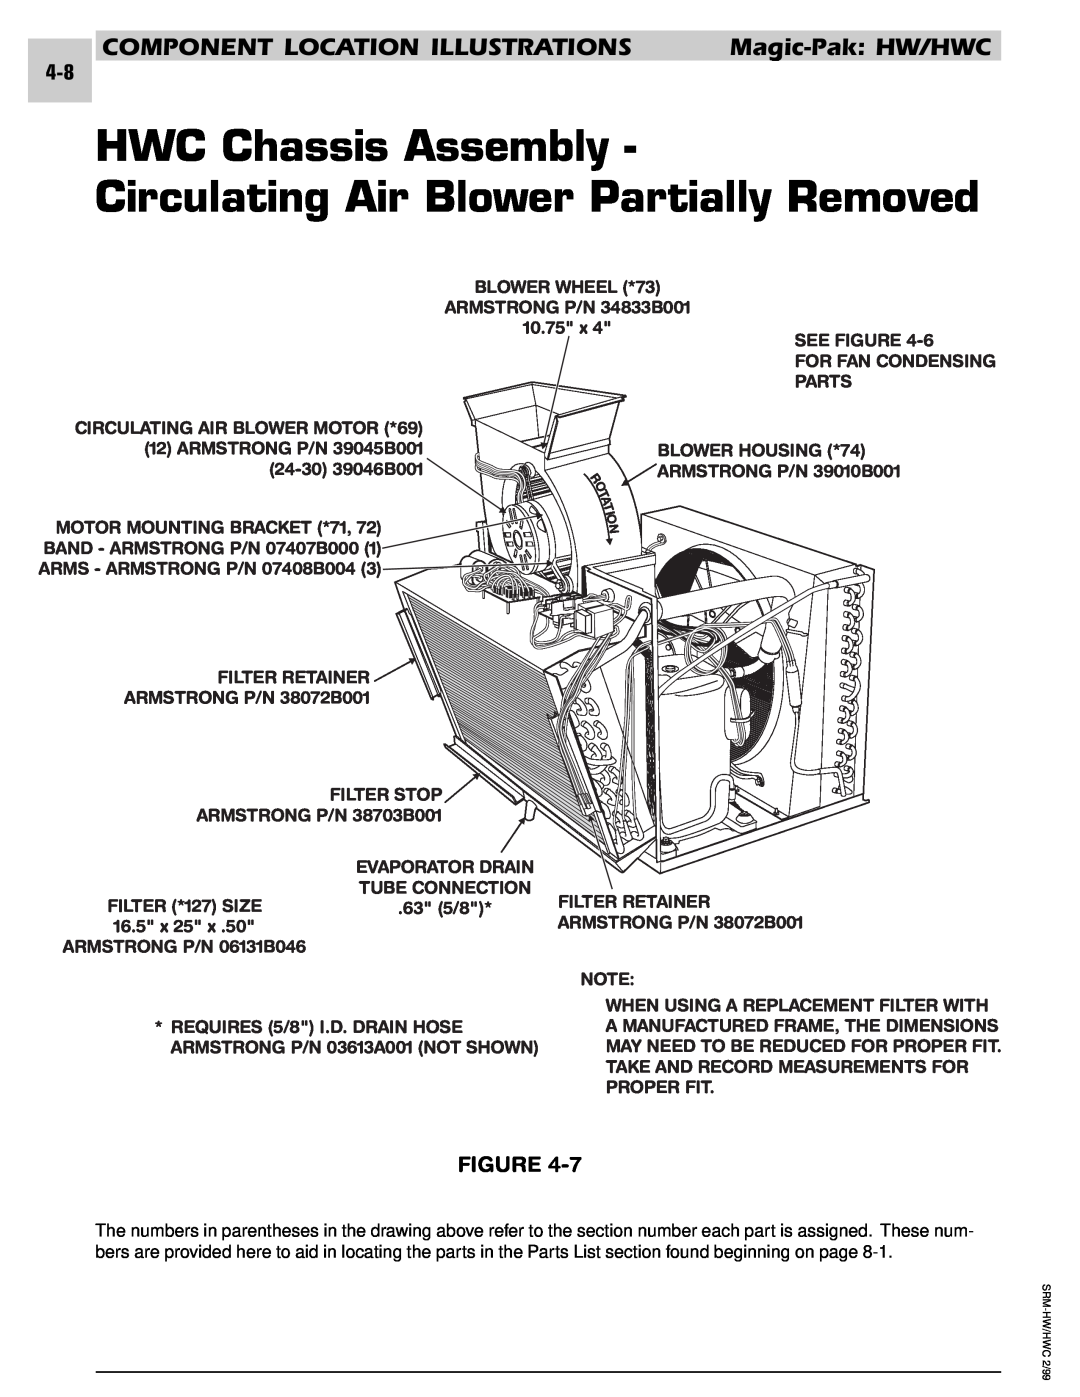 Armstrong World Industries 183 HWC Chassis Assembly Circulating Air Blower Partially Removed, For Fan Condensing Parts 